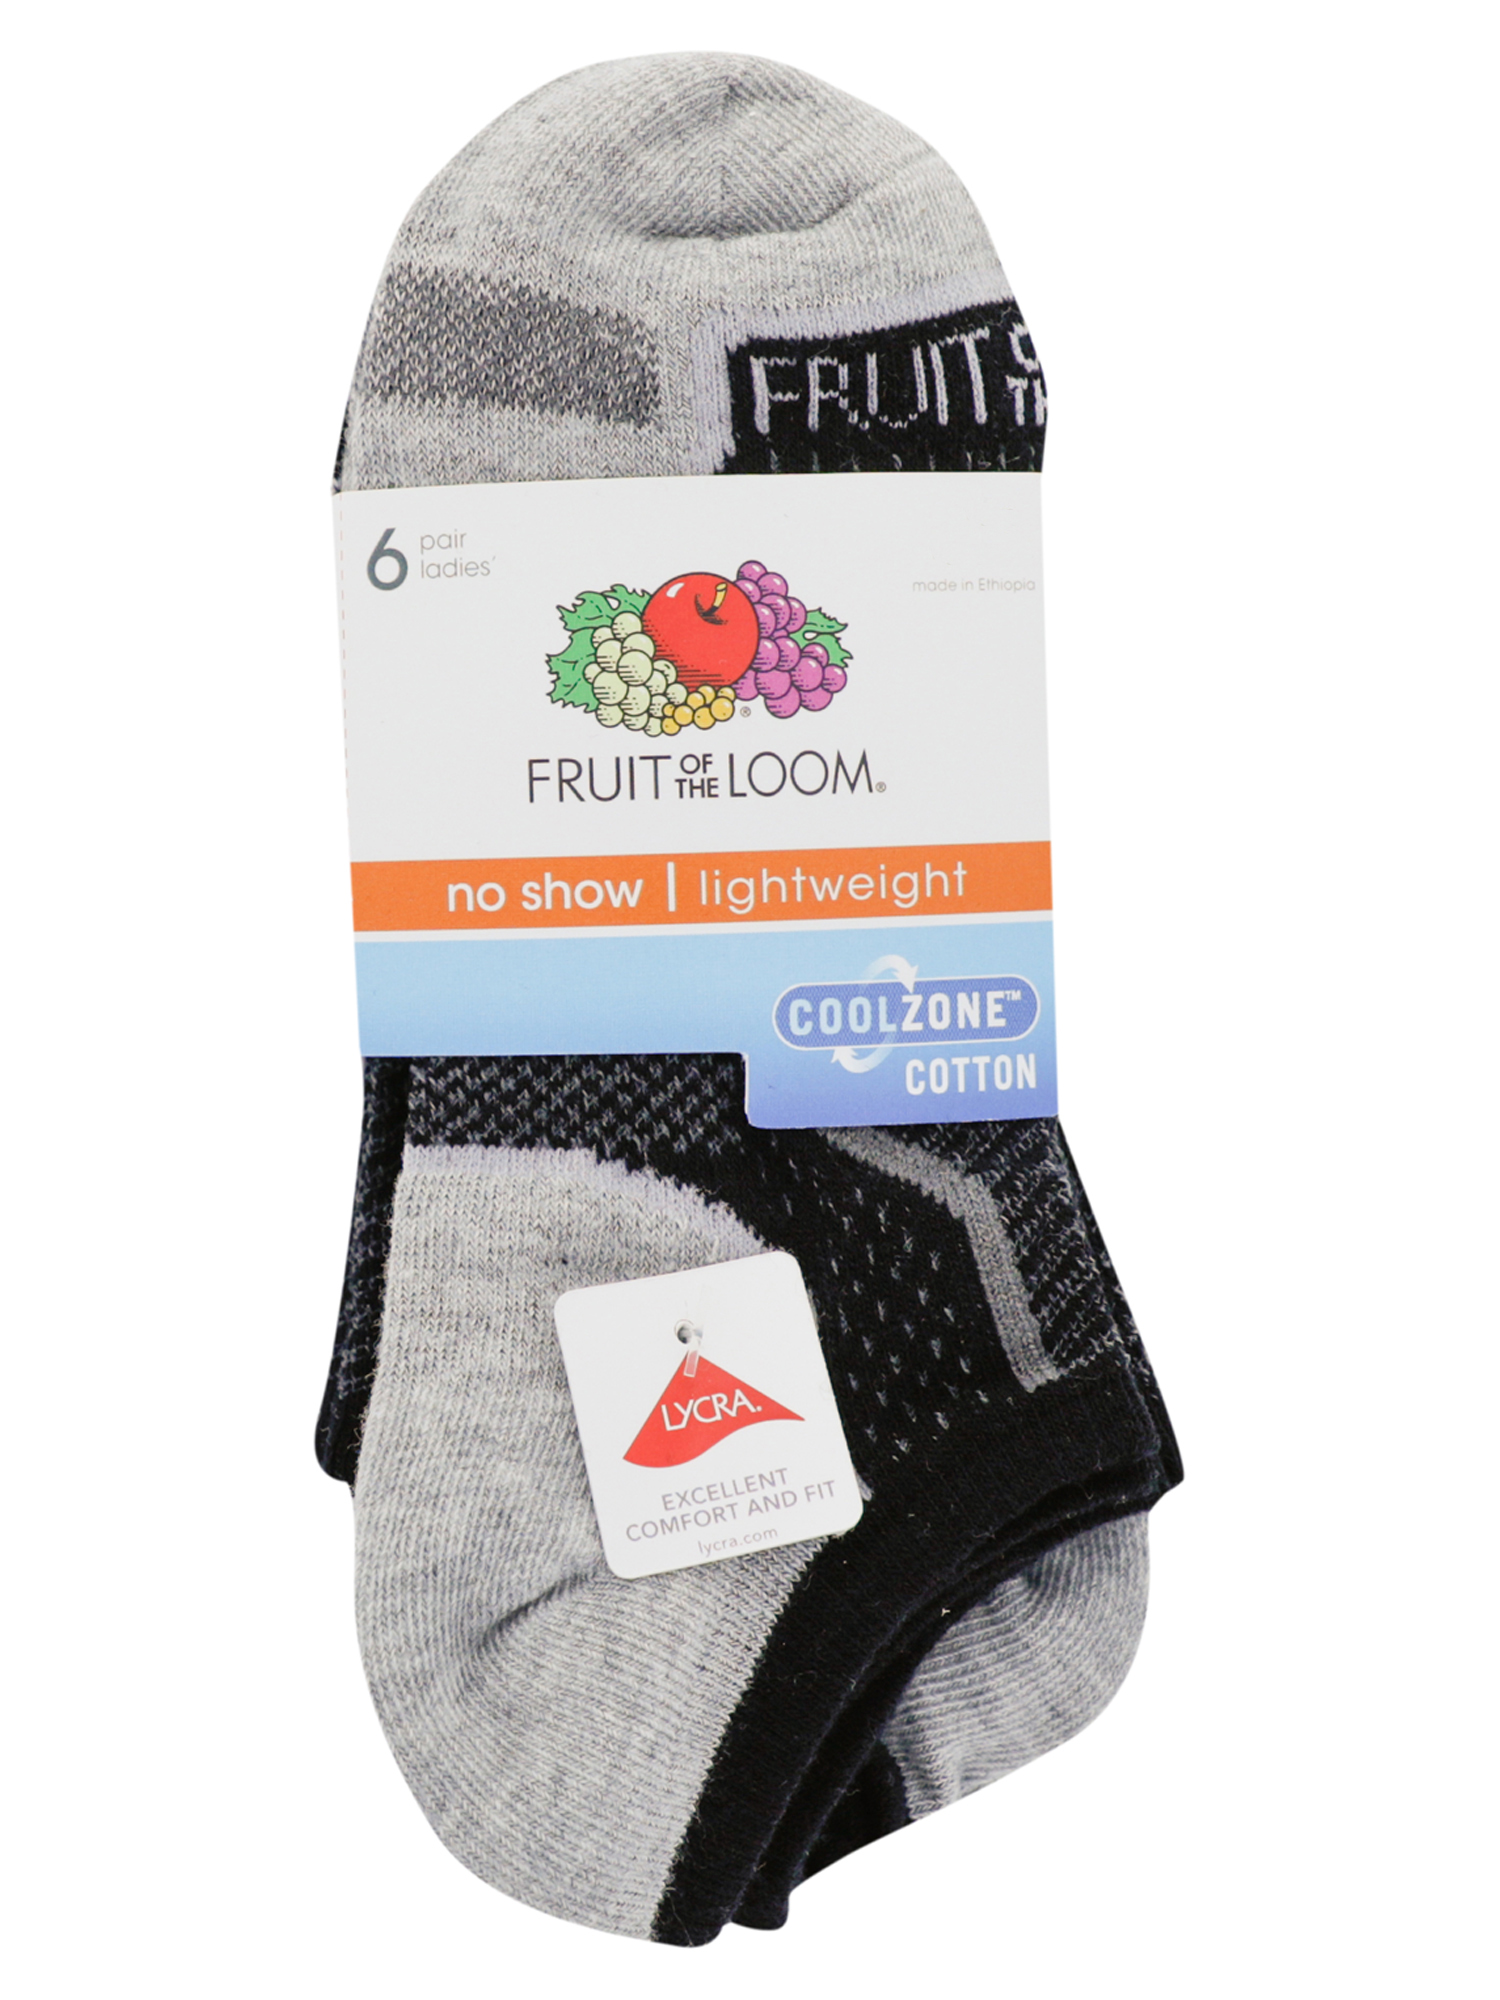 Fruit of the Loom Women's CoolZone Cotton Lightweight No Show Socks, 6 Pack - image 3 of 6